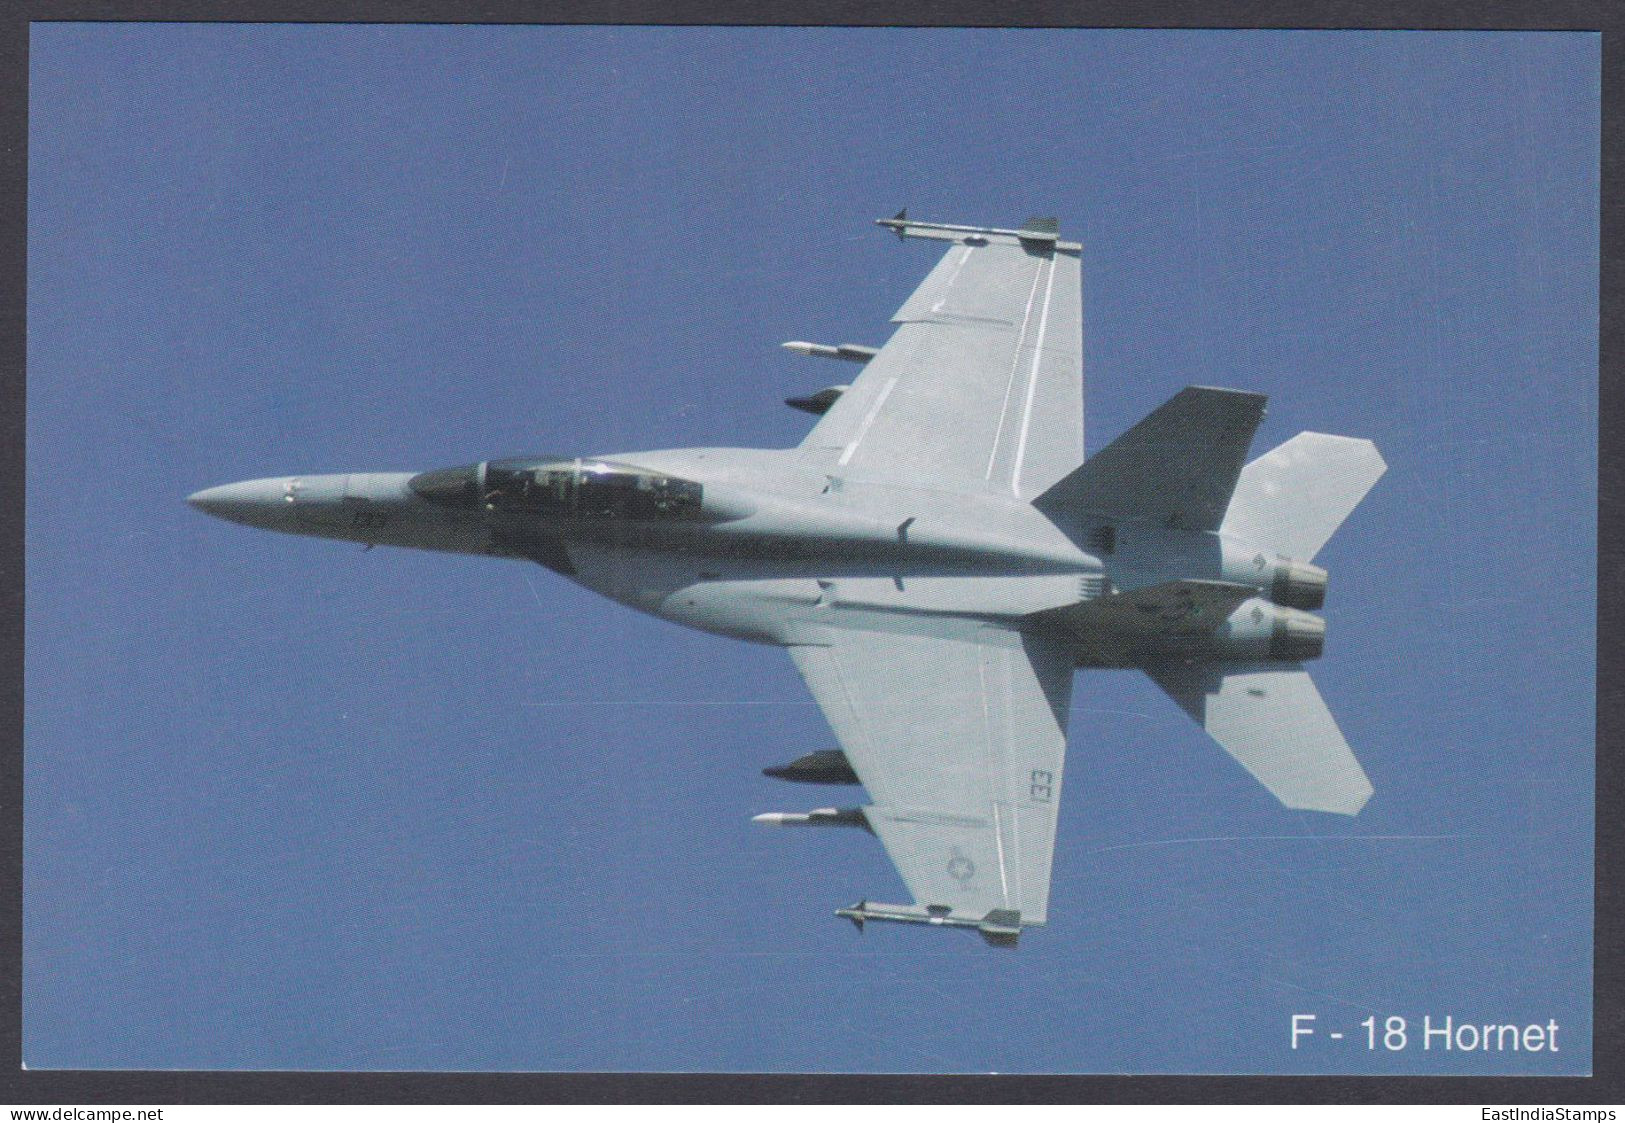 Inde India 2007 Mint Postcard Bangalore Air Show F-18, Hornet, Fighter Jet, Aircraft, Airplane, Aeroplane - Indien